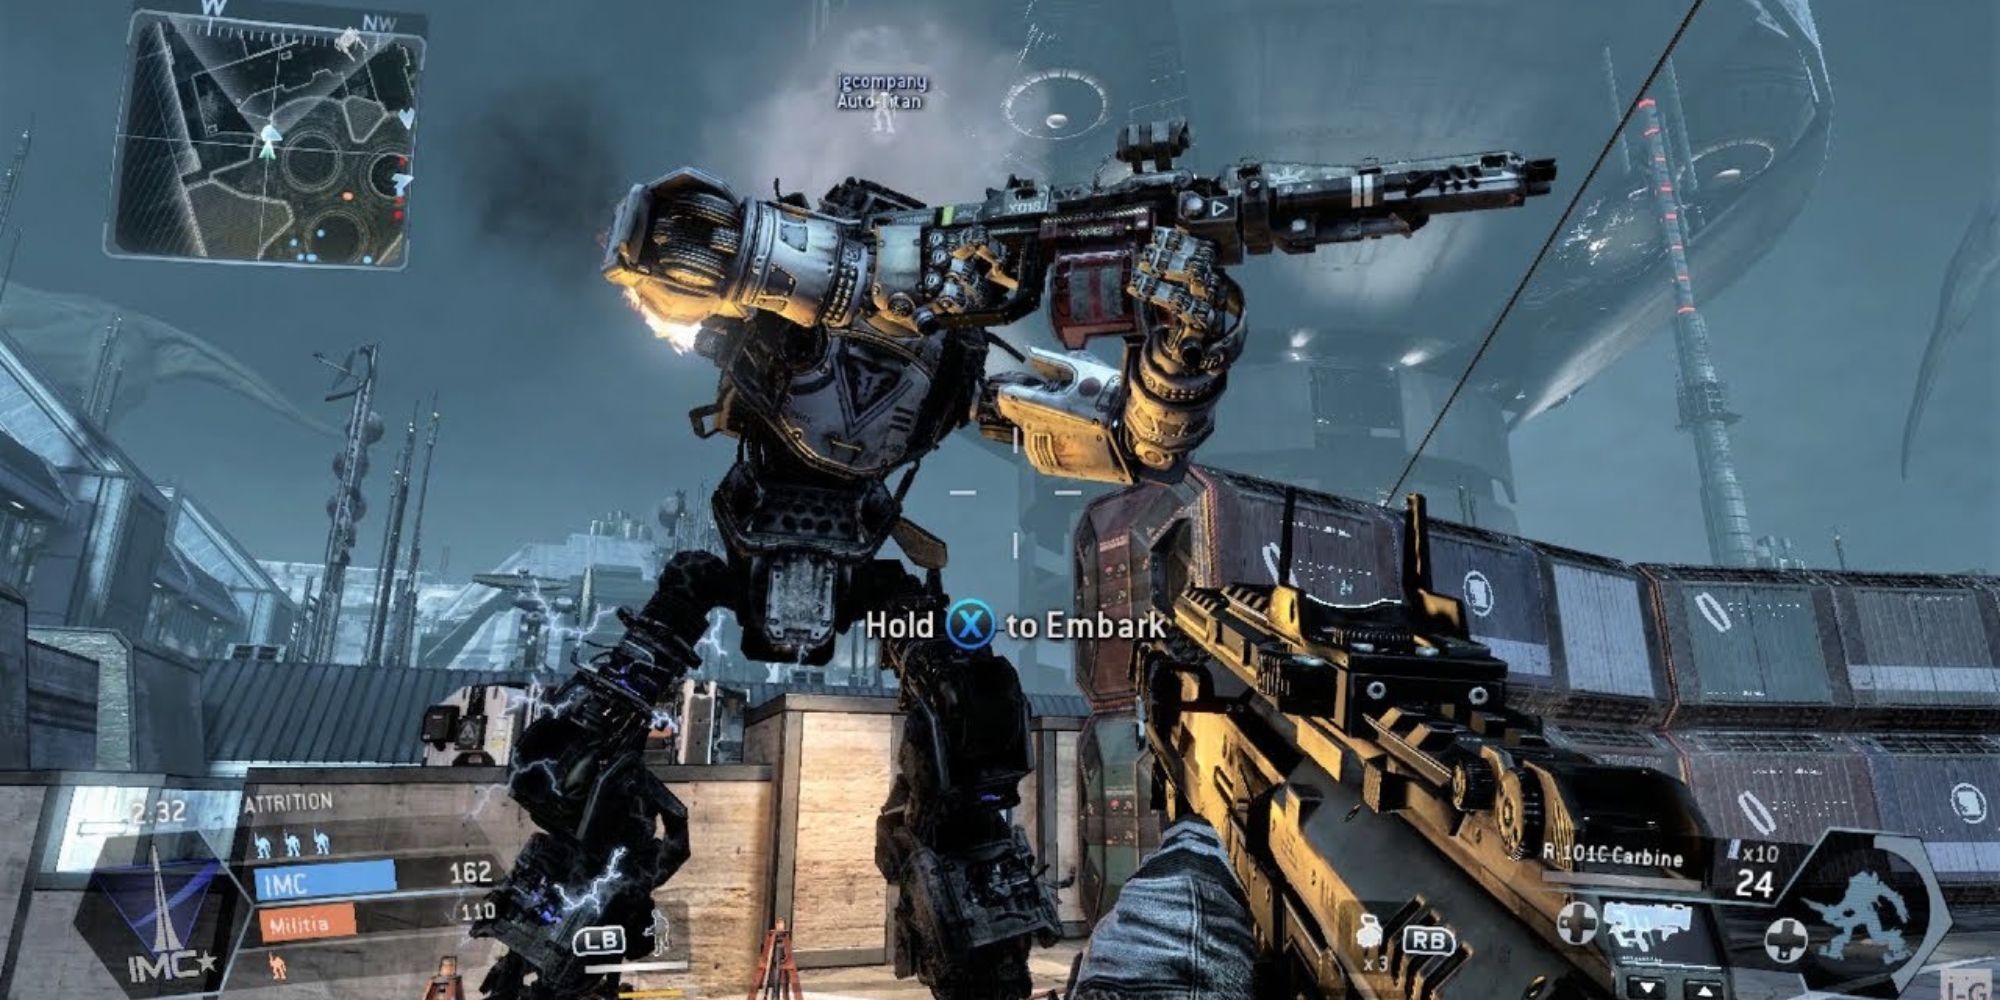 A player about to get in a Titan in Titanfall